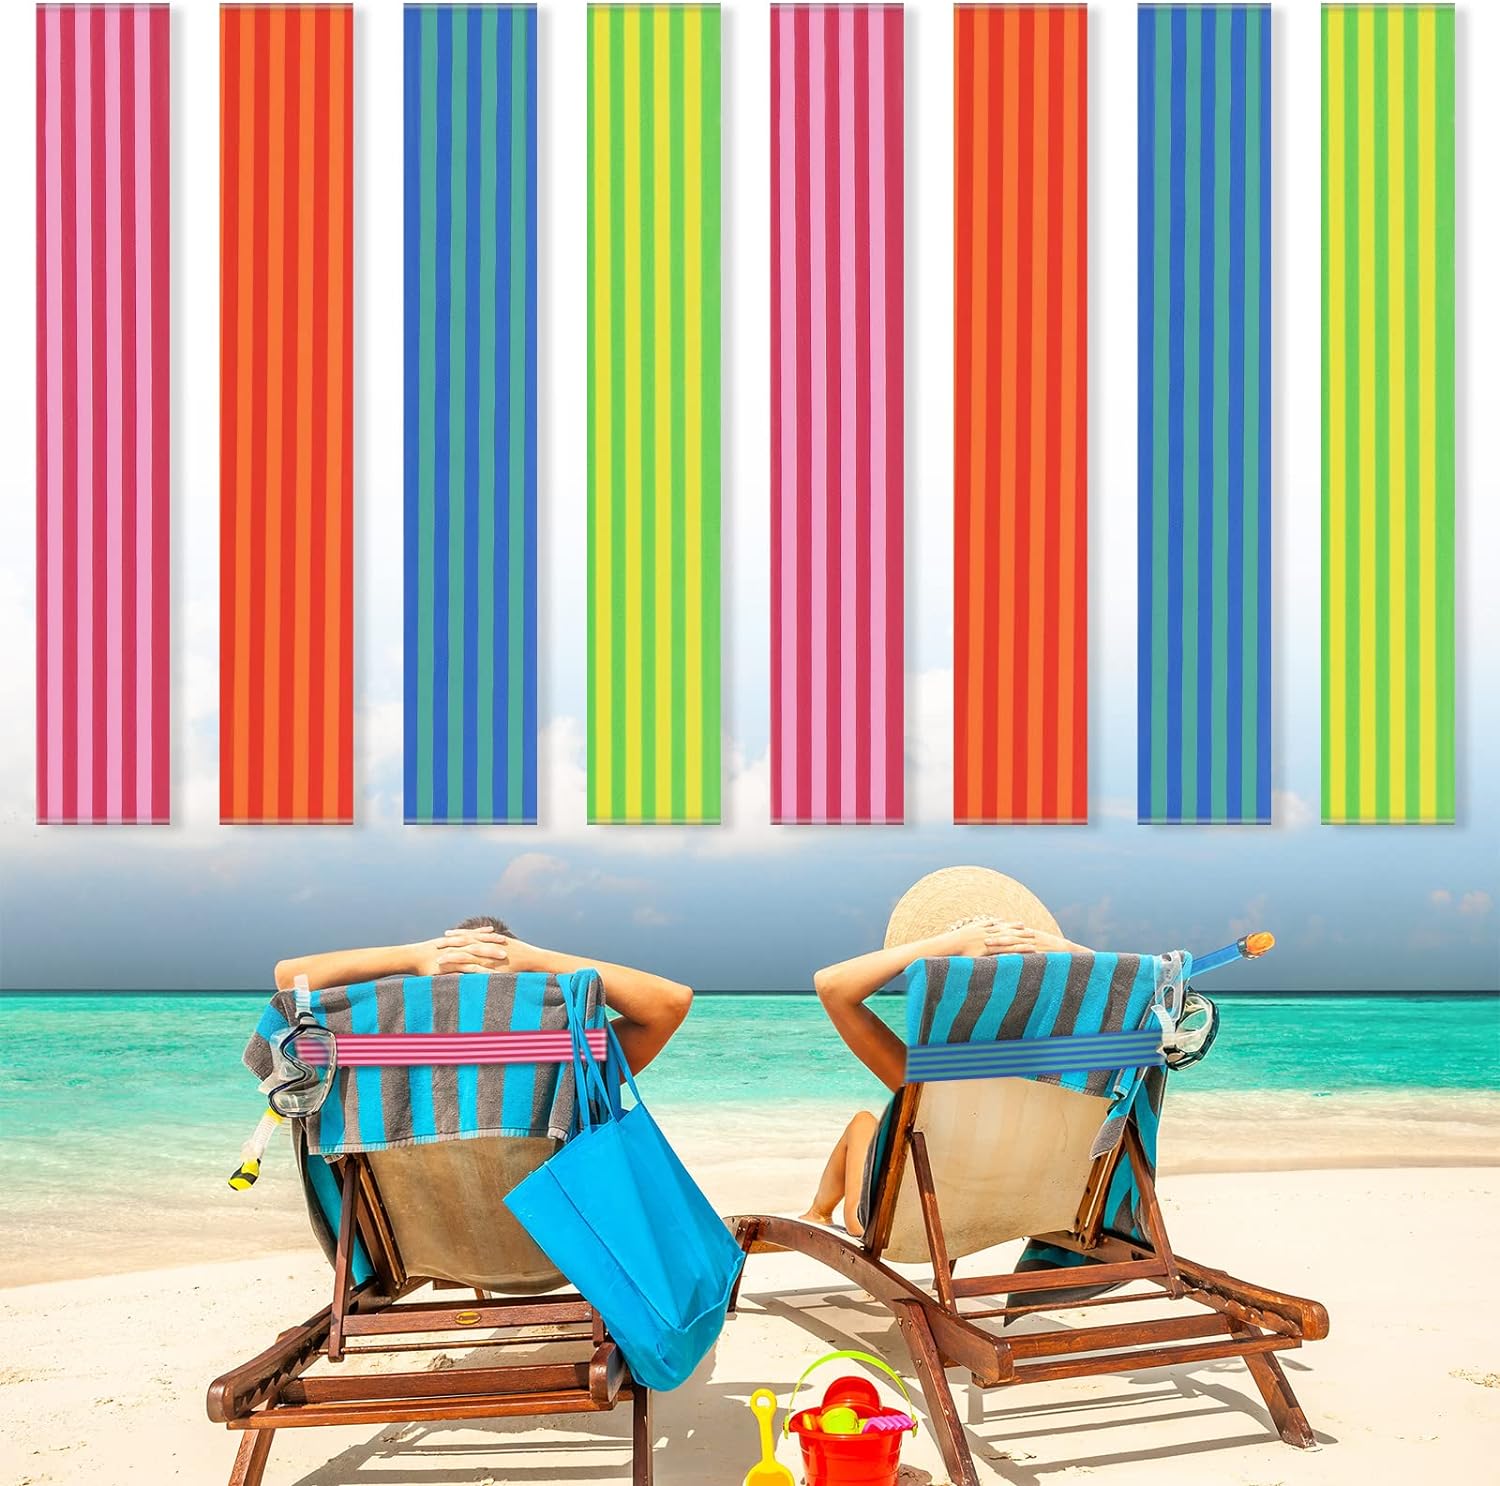 8 Pack Towel Bands for Beach Chairs Cruise Towel Clips for Lounge Beach Pool Chairs Towel Strap Holder Elastic Windproof Beach Accessories for Summer (Stripe Style, 11.81 x 1.97 Inch)